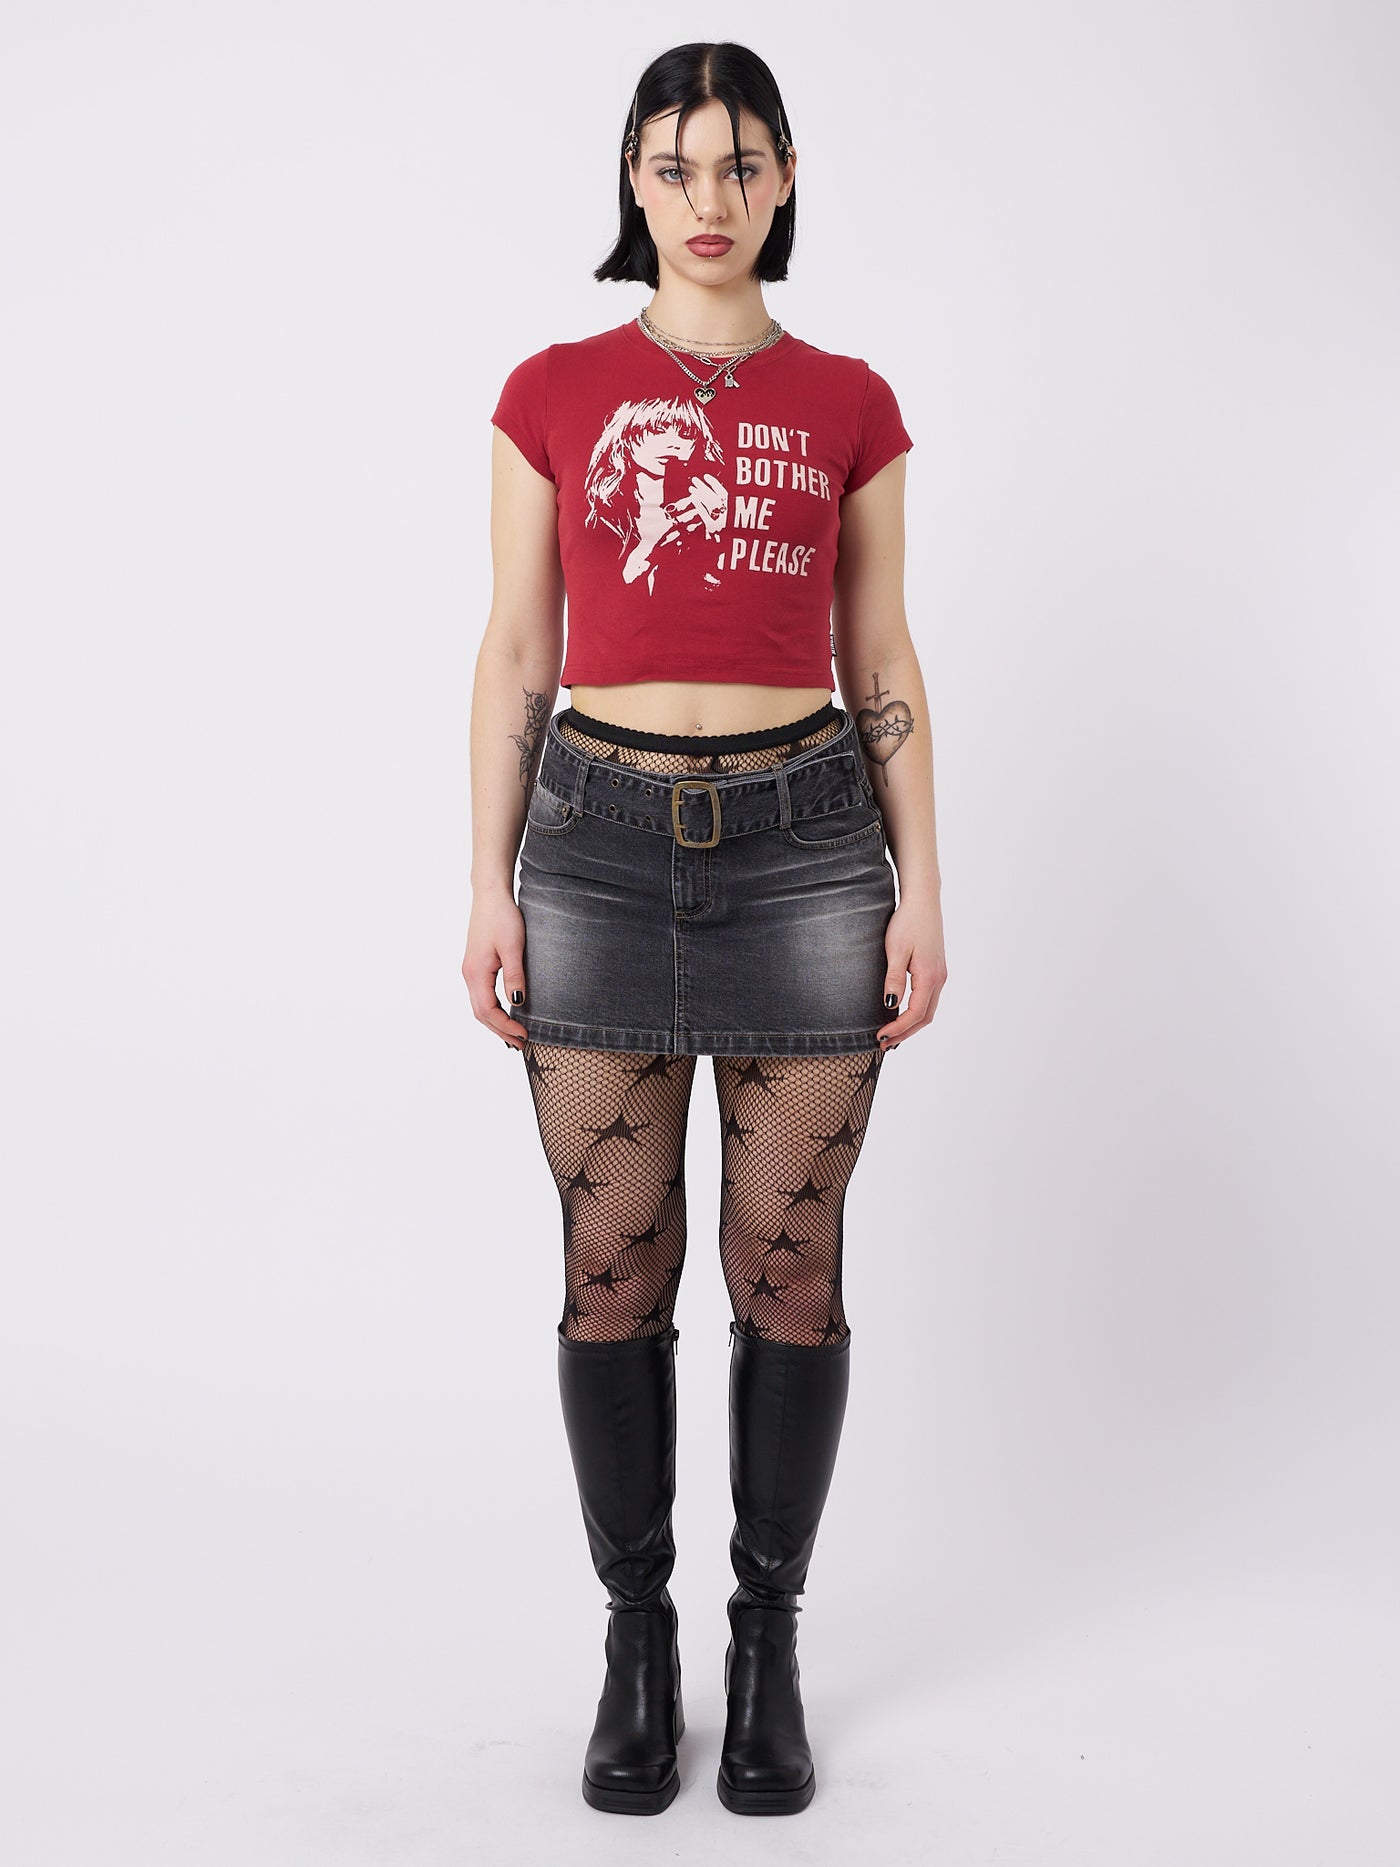 A red baby tee with the text "Don't Bother Me Plz" by Minga London. This tee exudes a cool and laid-back vibe, making a bold statement while adding a touch of attitude to your outfit.